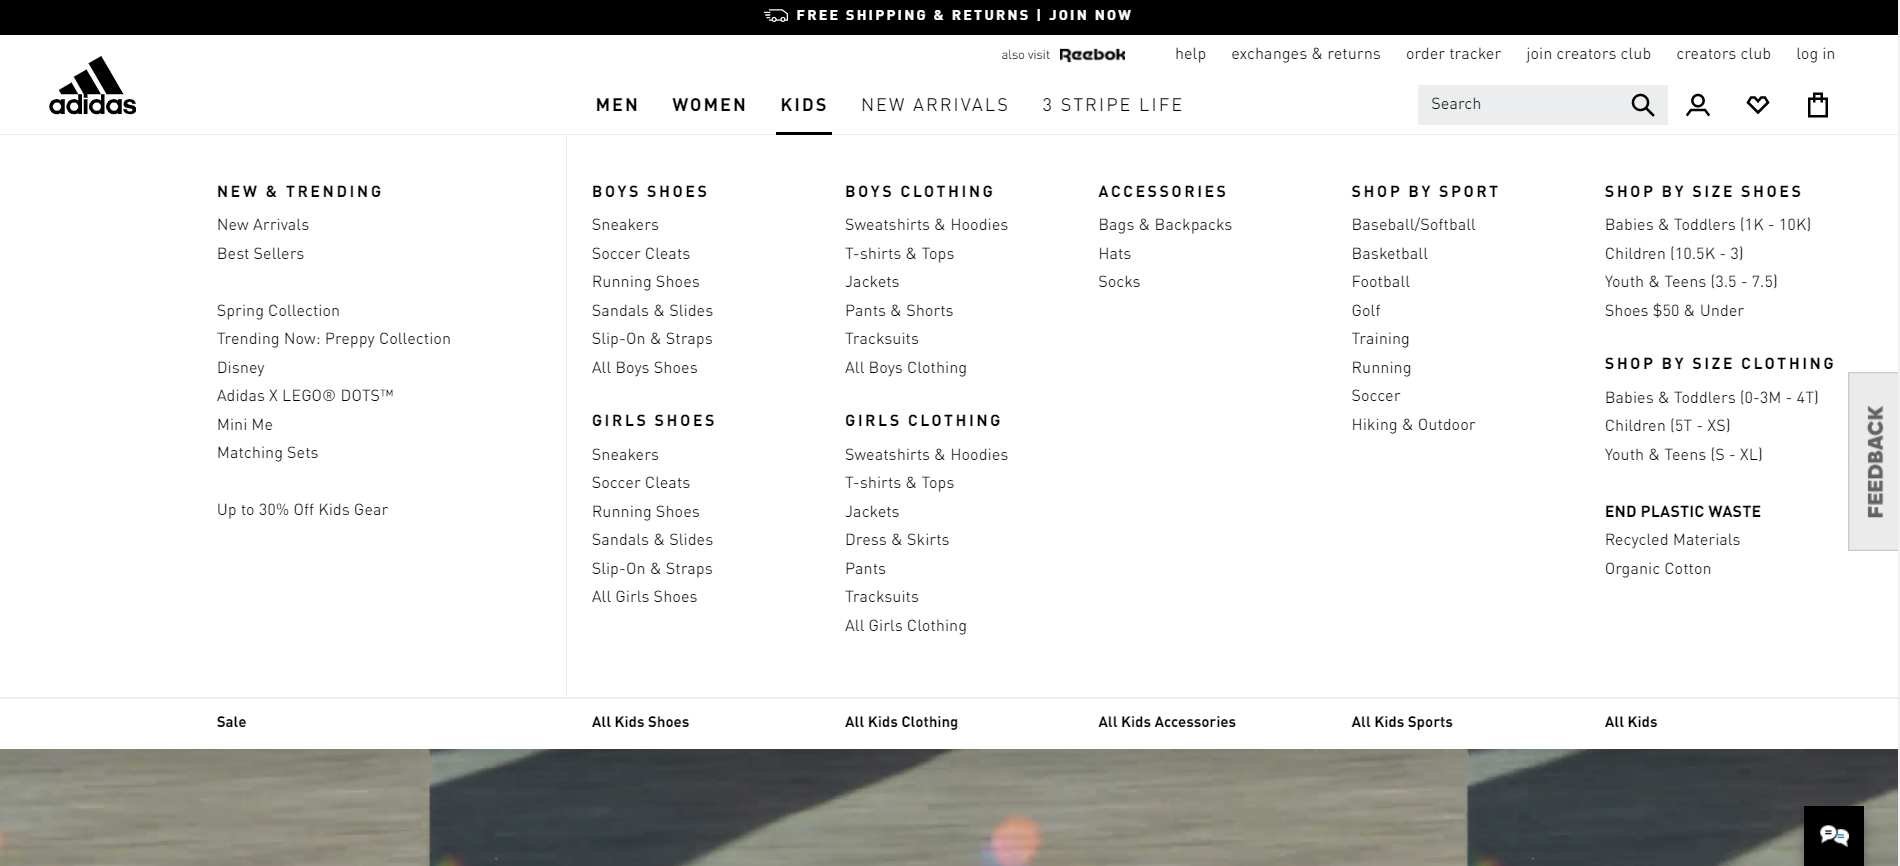 (Adidas filters) large inventory of an online store and navigation menu